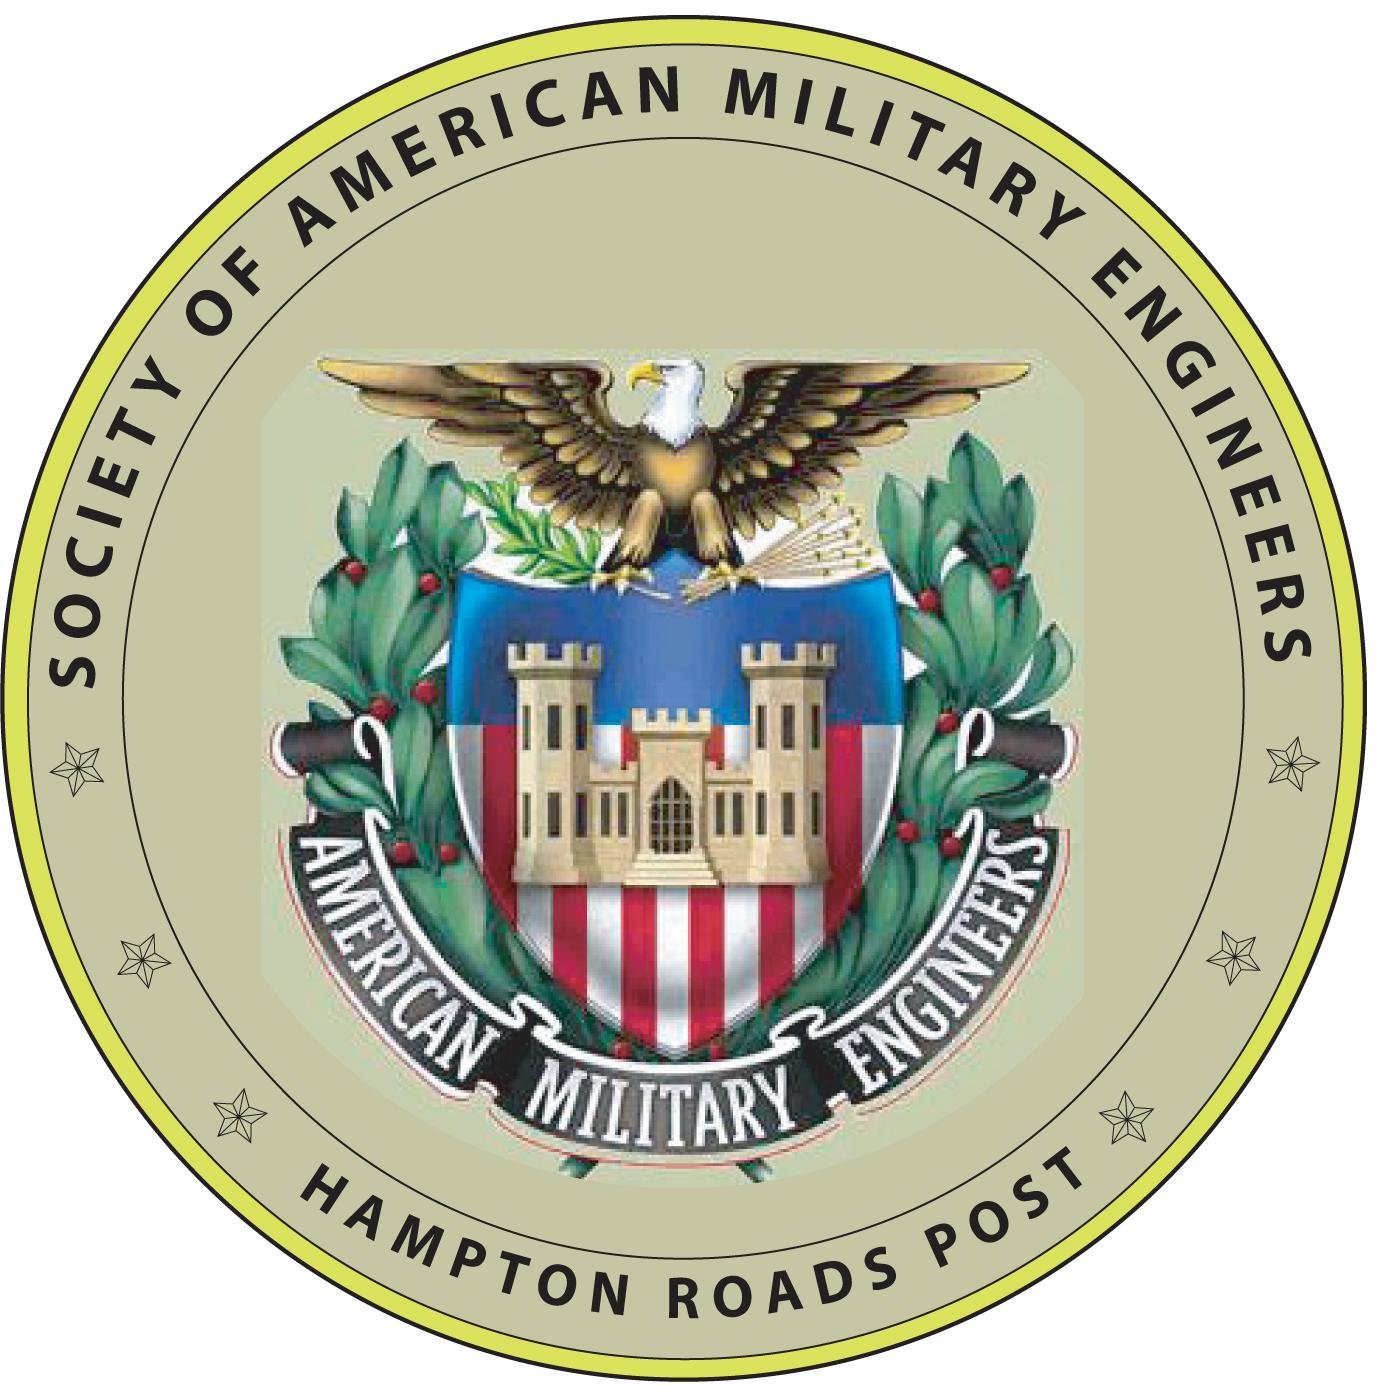 The premier professional military engineering association in the US. The Hampton Roads Post is comprised of approximately 800 members.